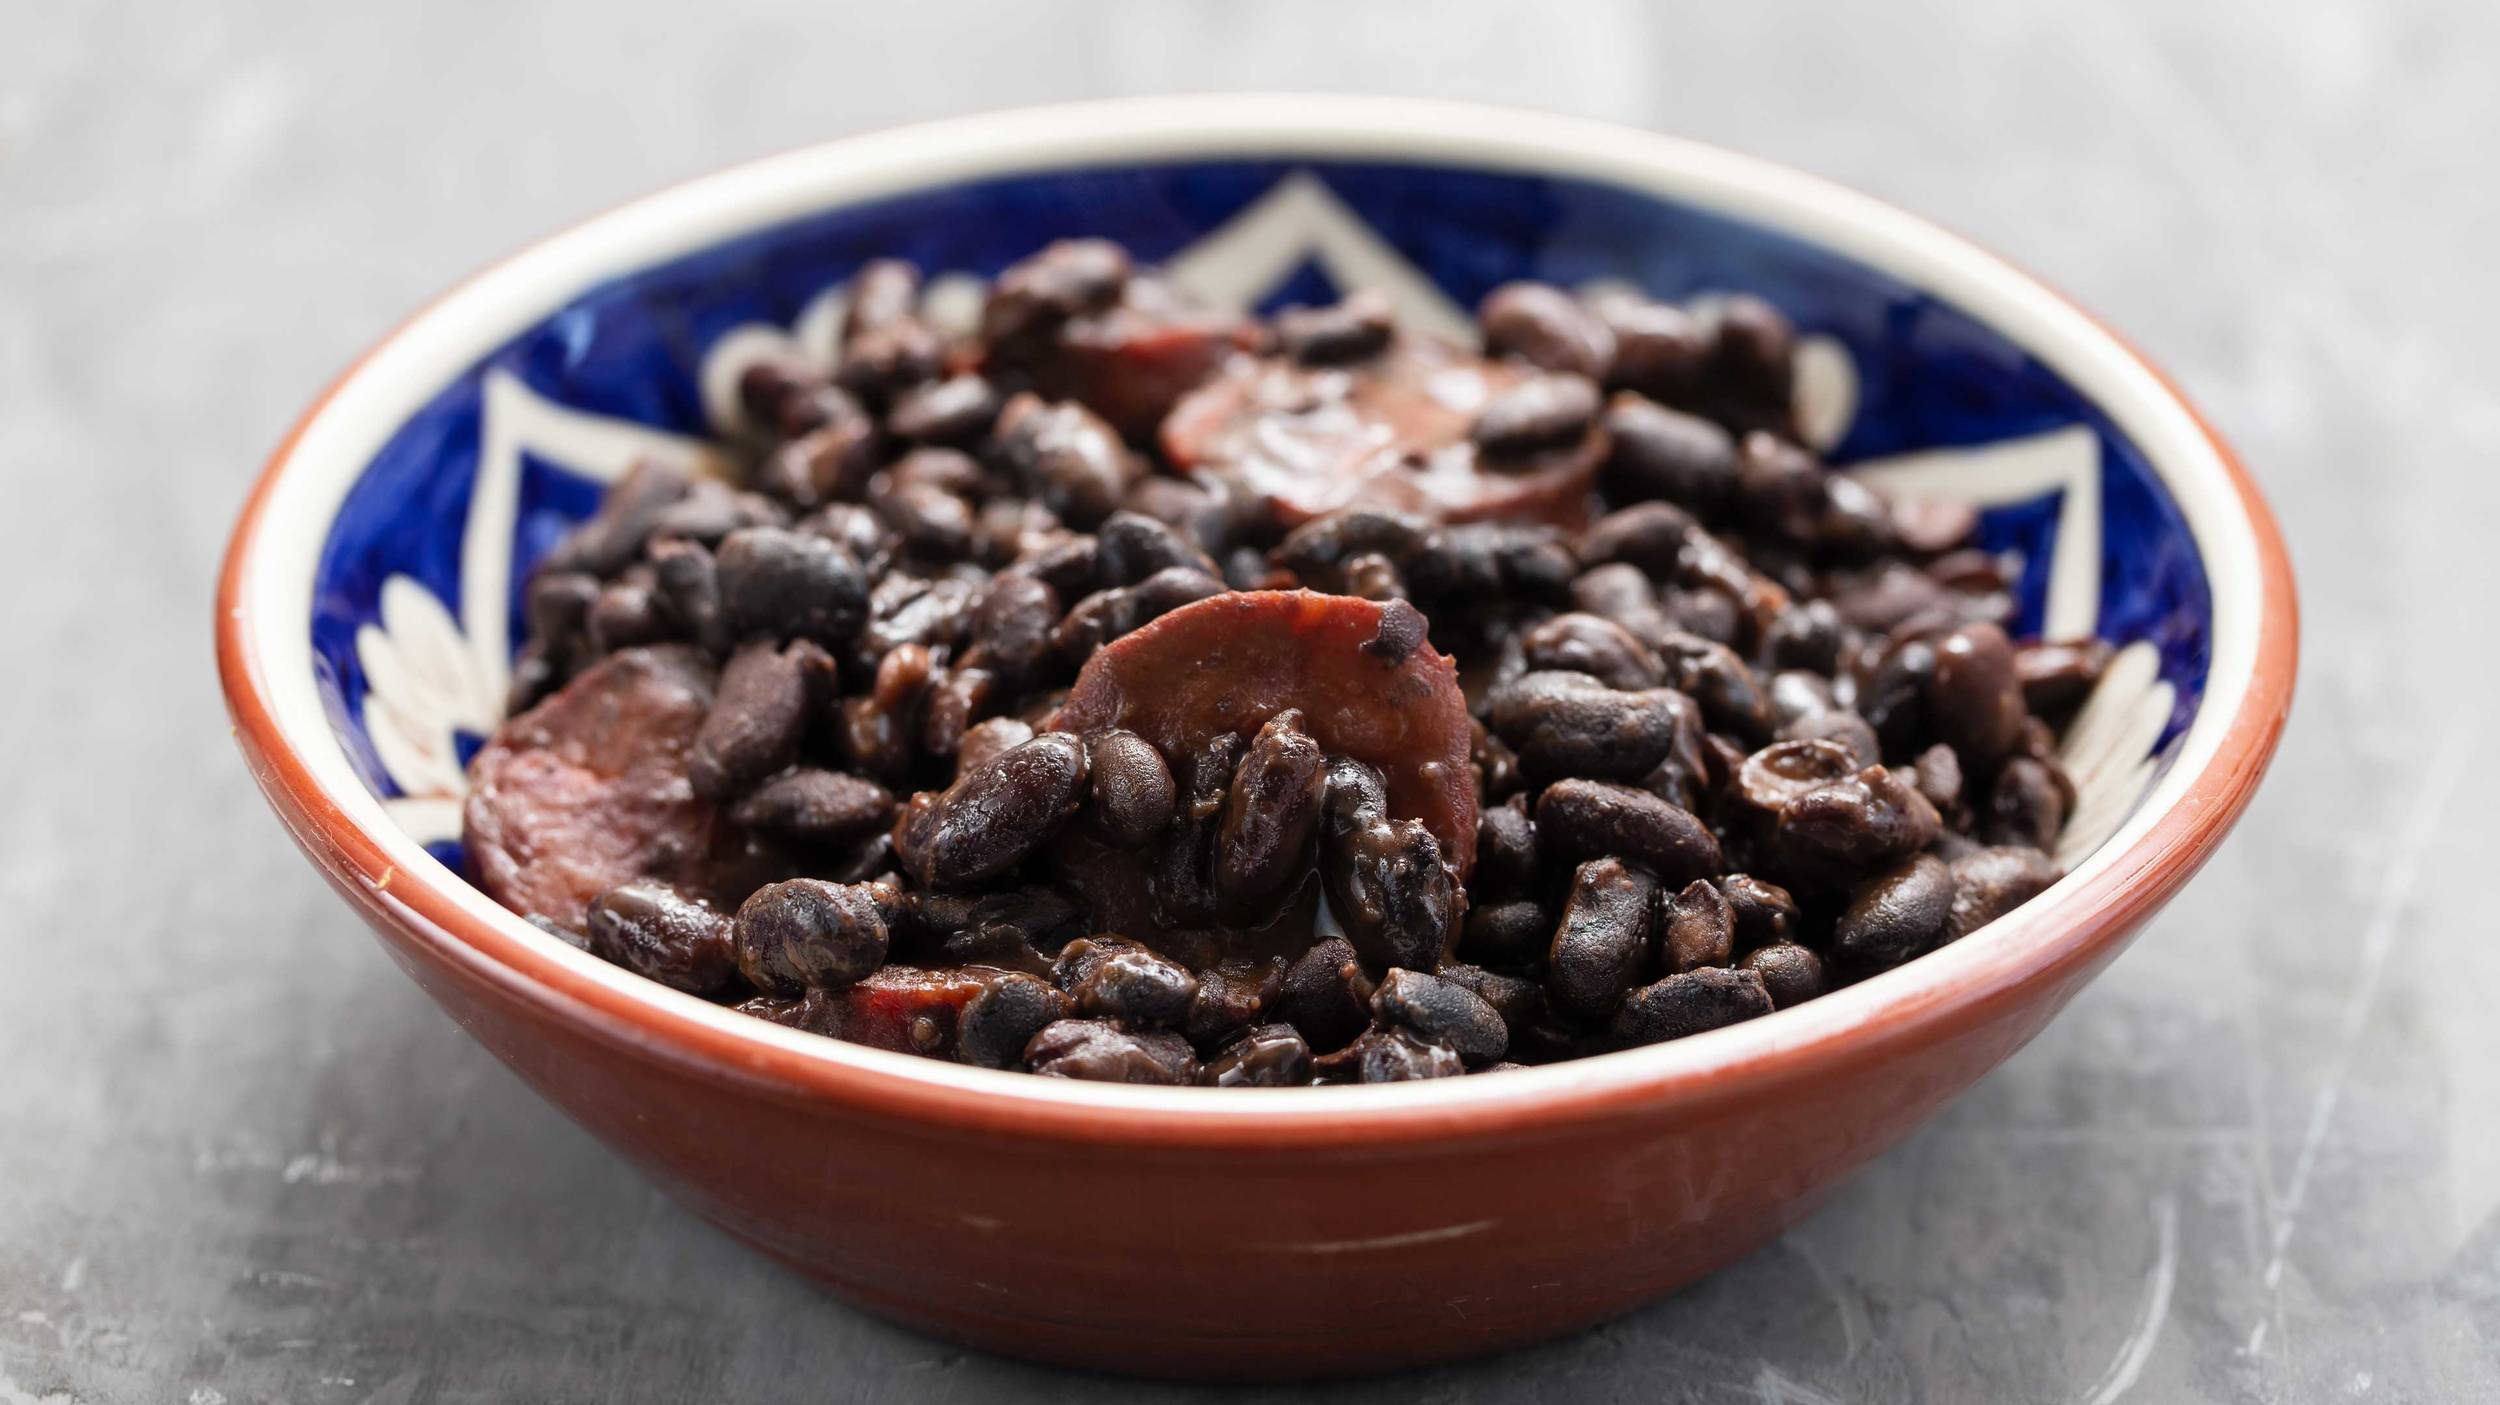 Black beans are great in stews, soups, dips and sales and can be used in burritos or tacos.